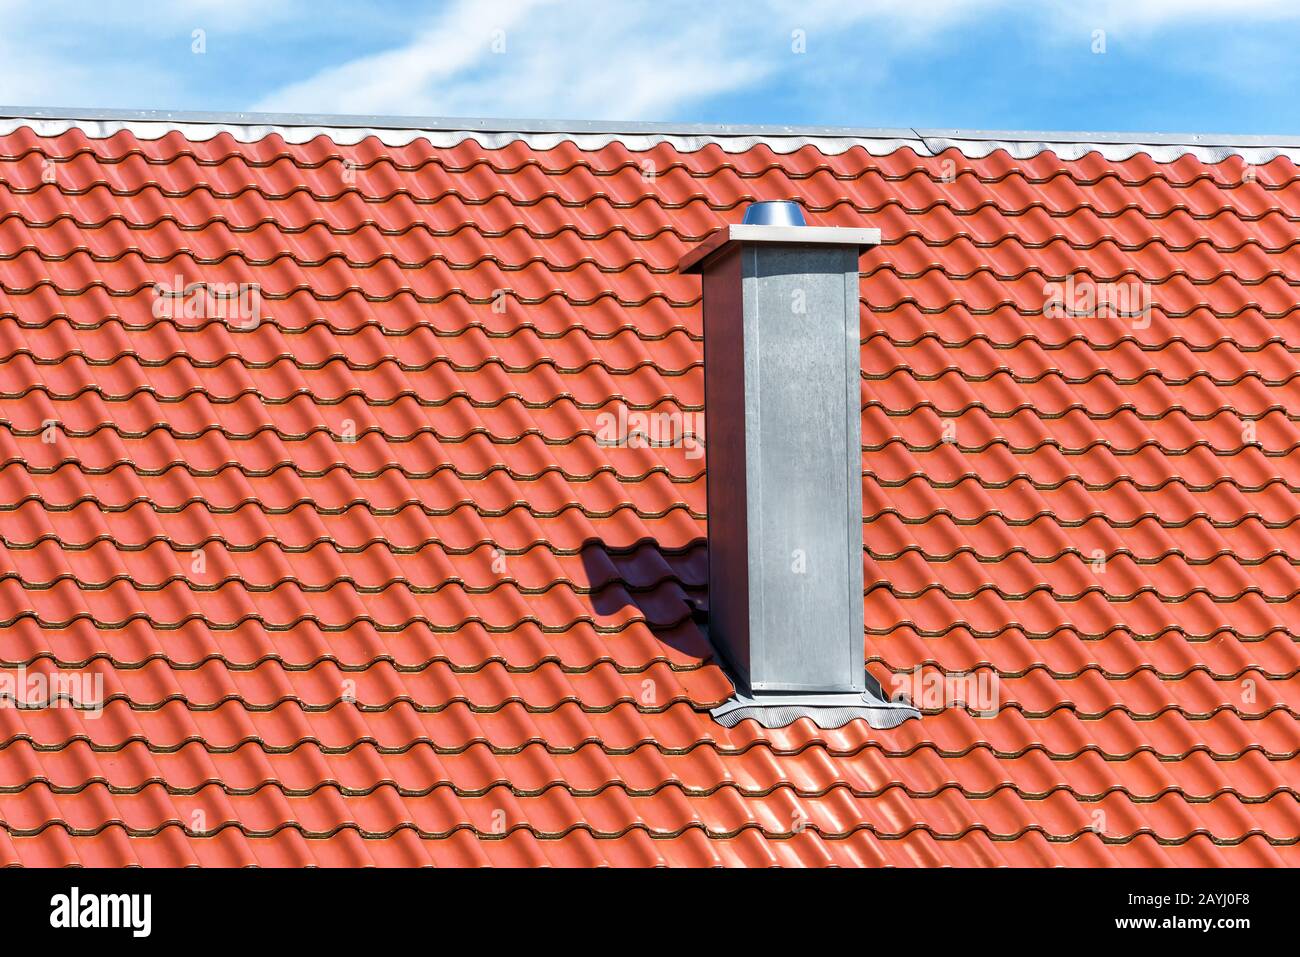 Chimney on clean roof of residential house. Metal chimney pipe on background of red tiles. Modern air vent system on rooftop. Steel home chimney close Stock Photo